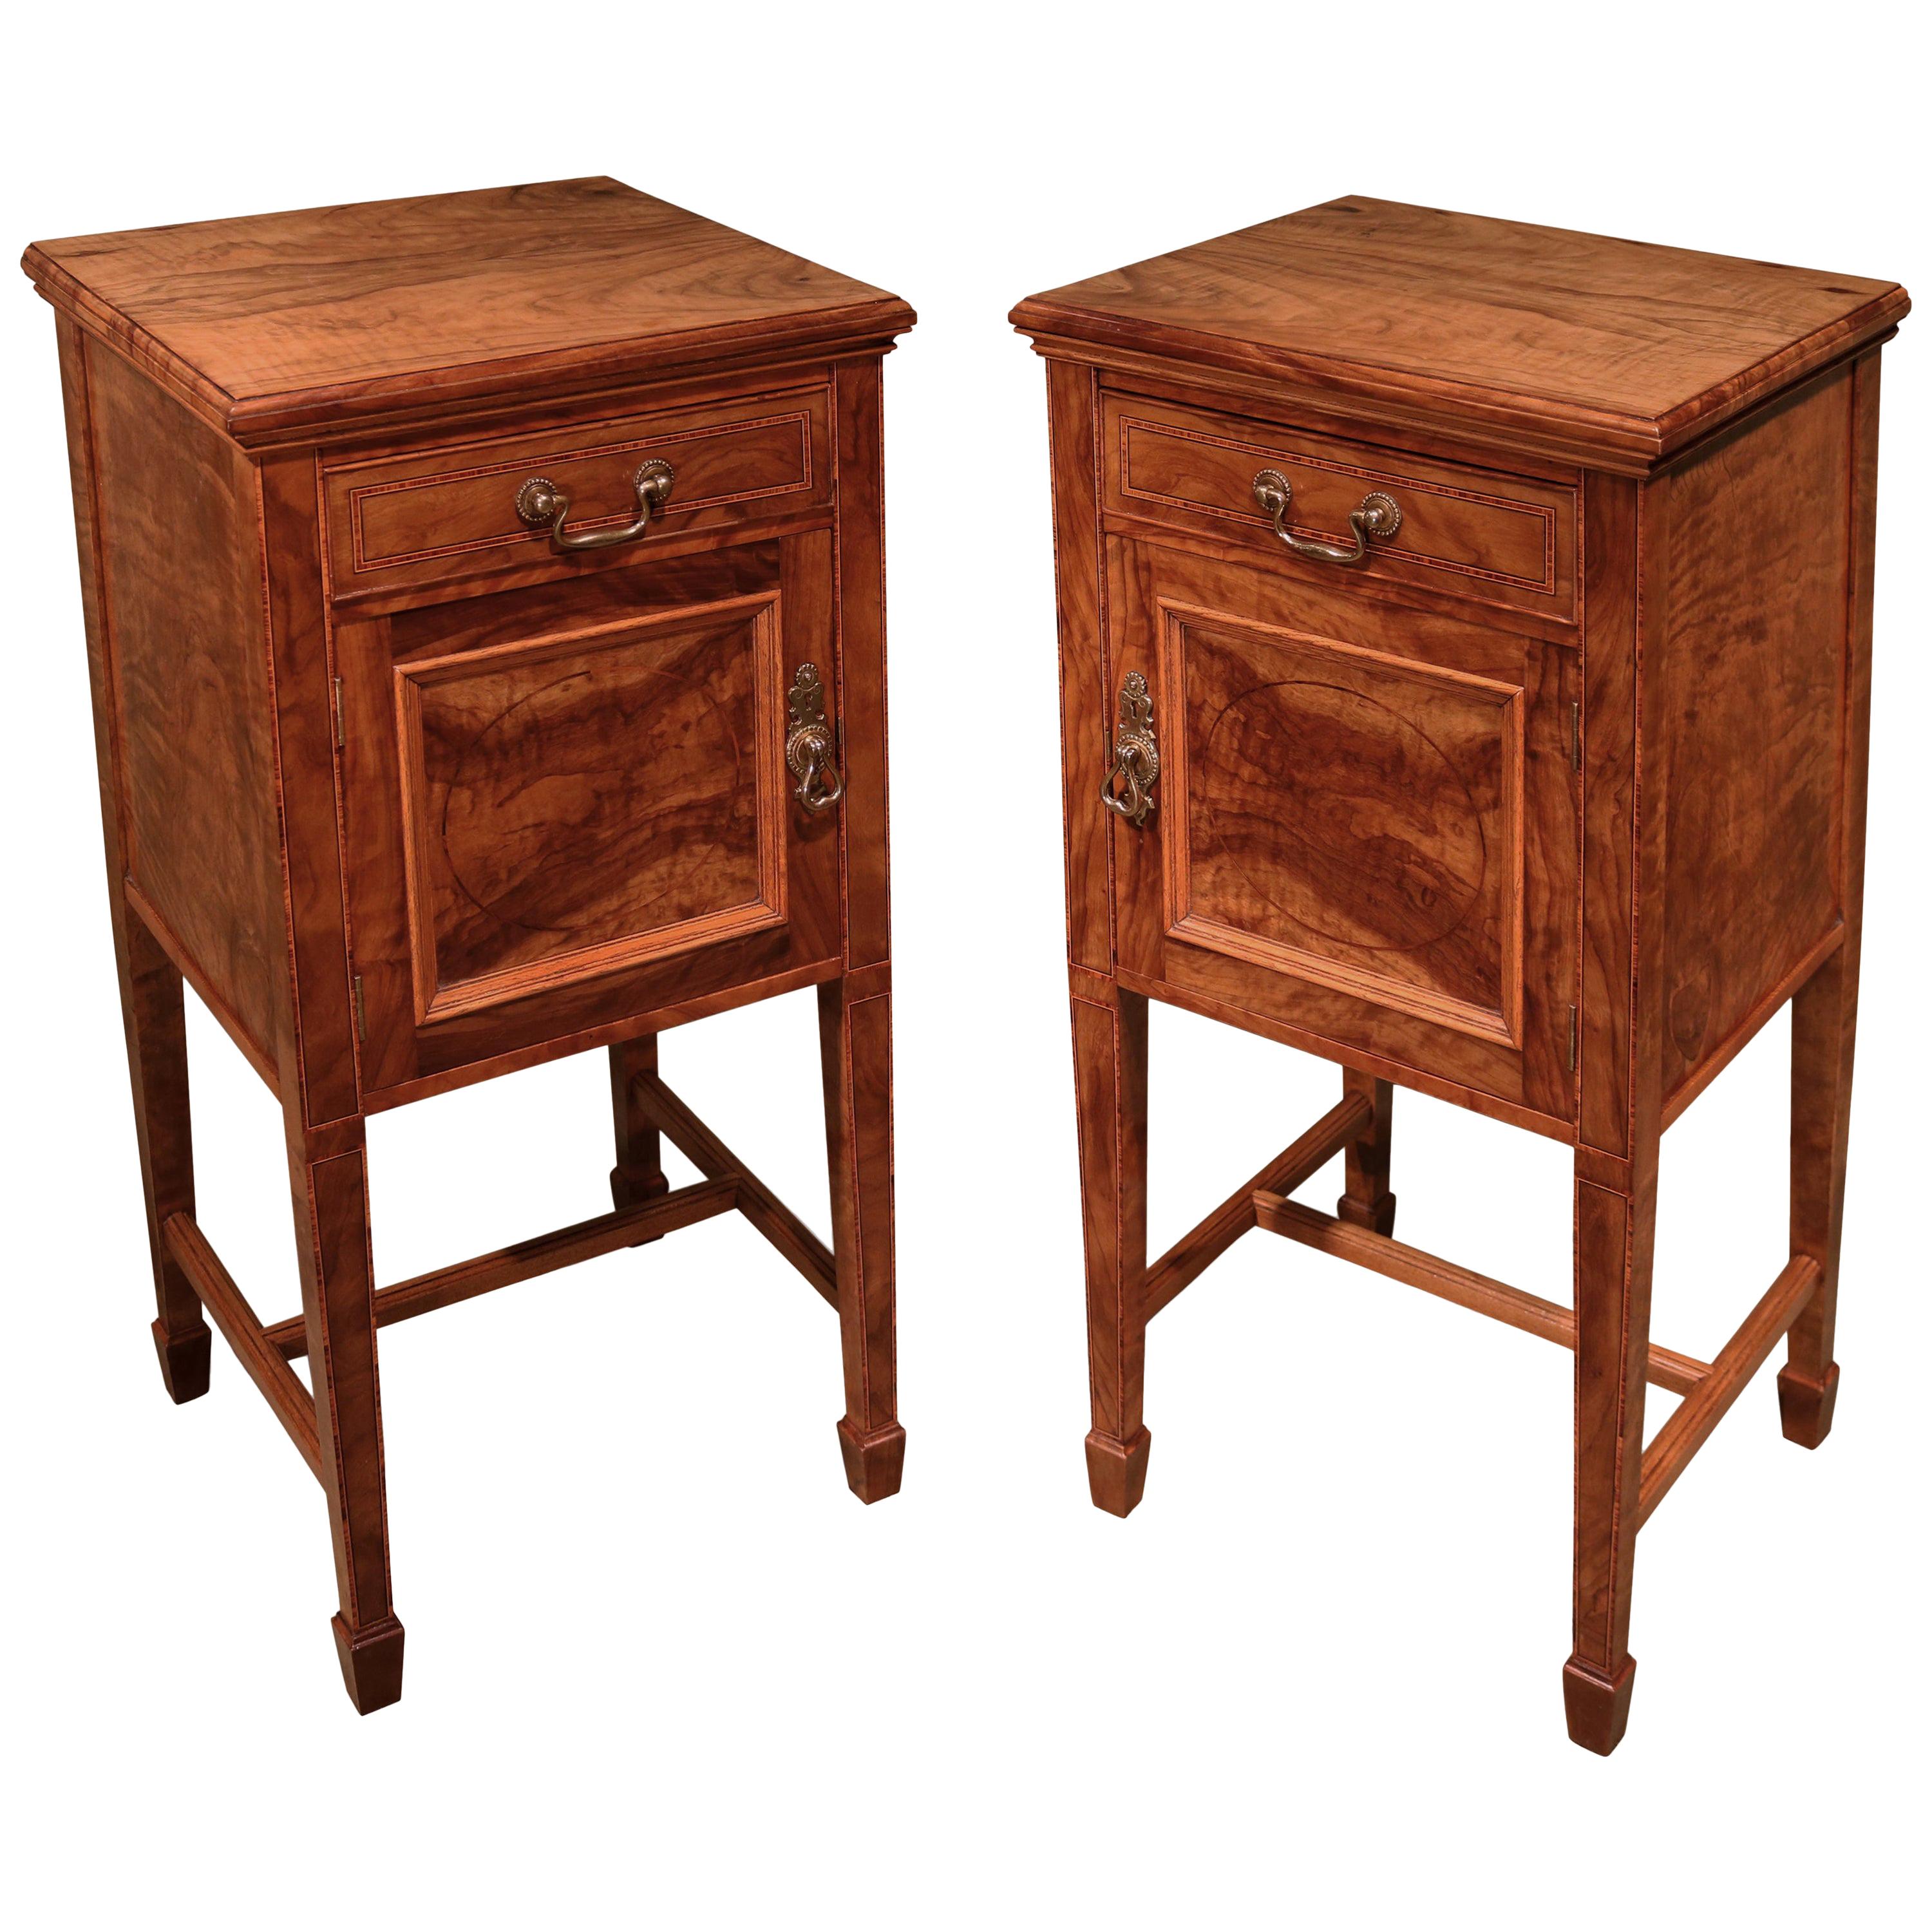 Pair of 19th Century figured Olivewood Bedside Cabinets